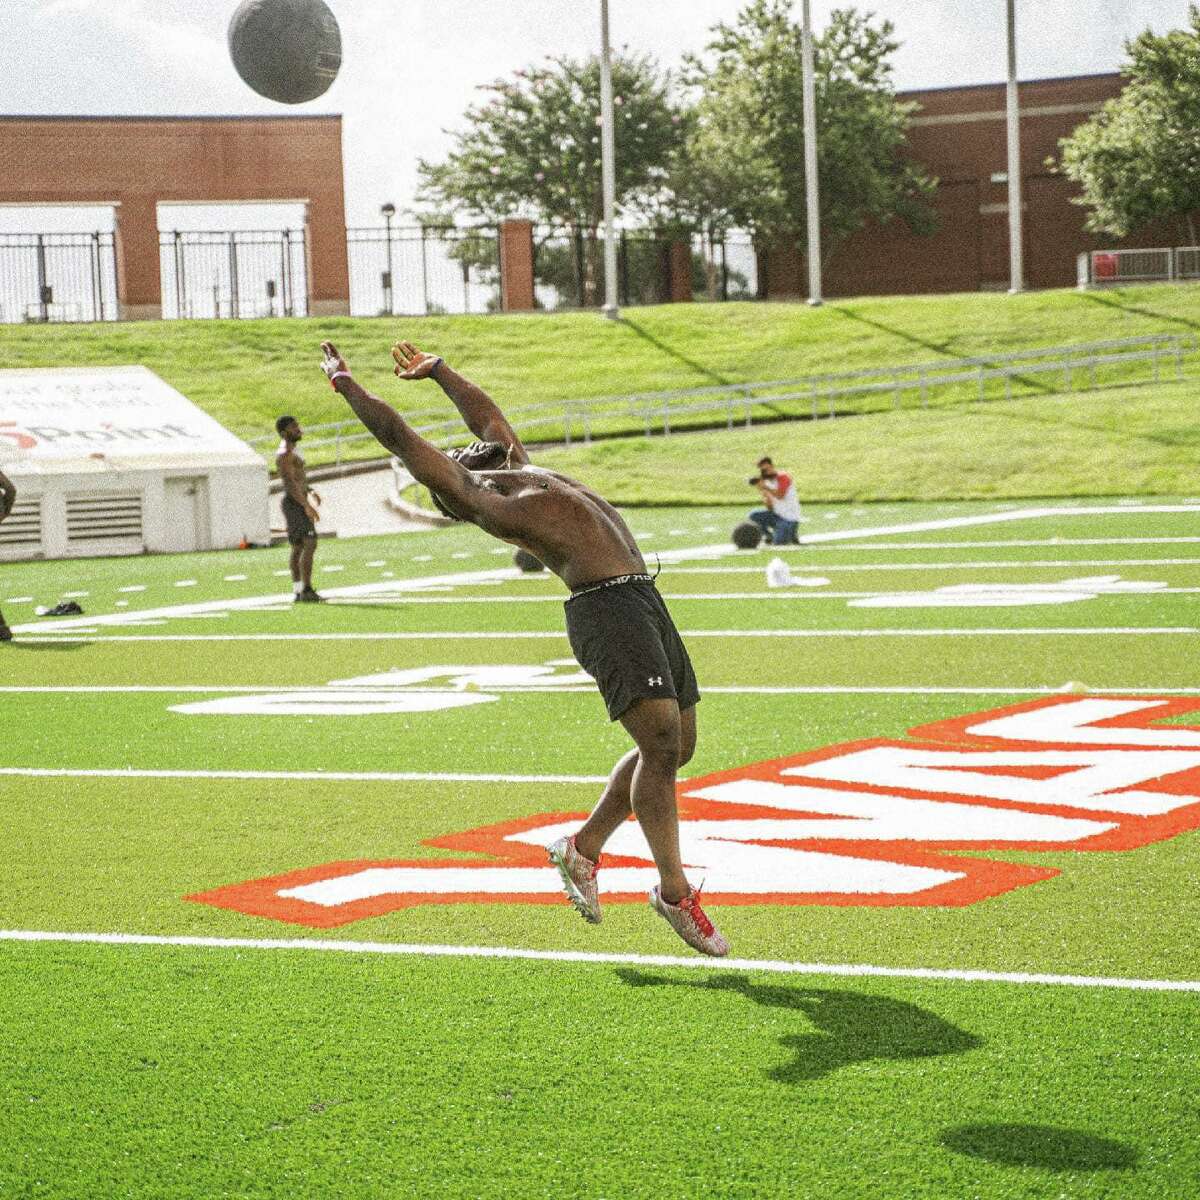 A Lamar football player trains on the new turf surface at Provost Umphrey Stadium, which includes the new Western Athletic Conference logo seen in the background.